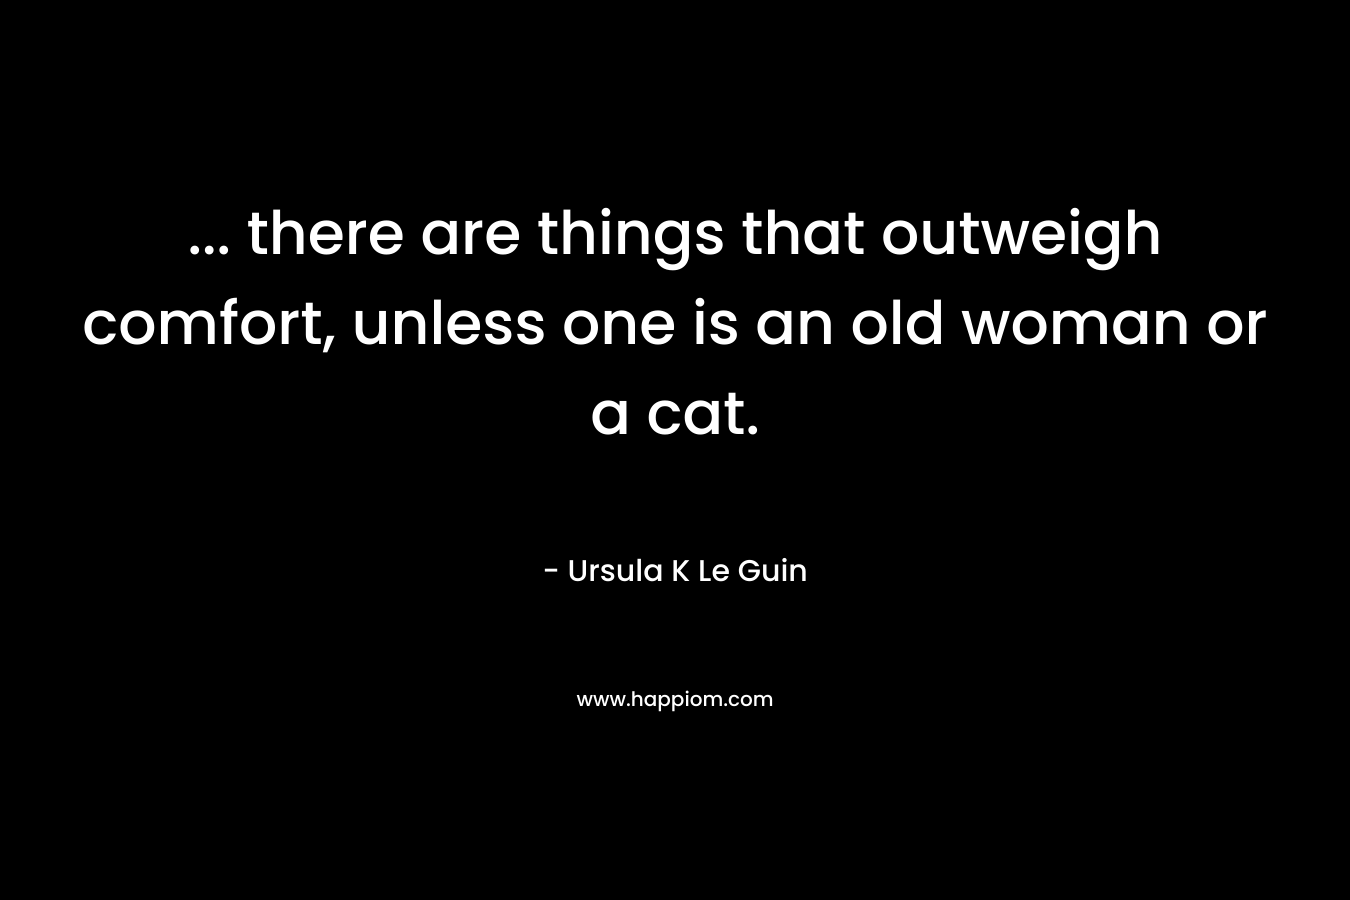 … there are things that outweigh comfort, unless one is an old woman or a cat. – Ursula K Le Guin